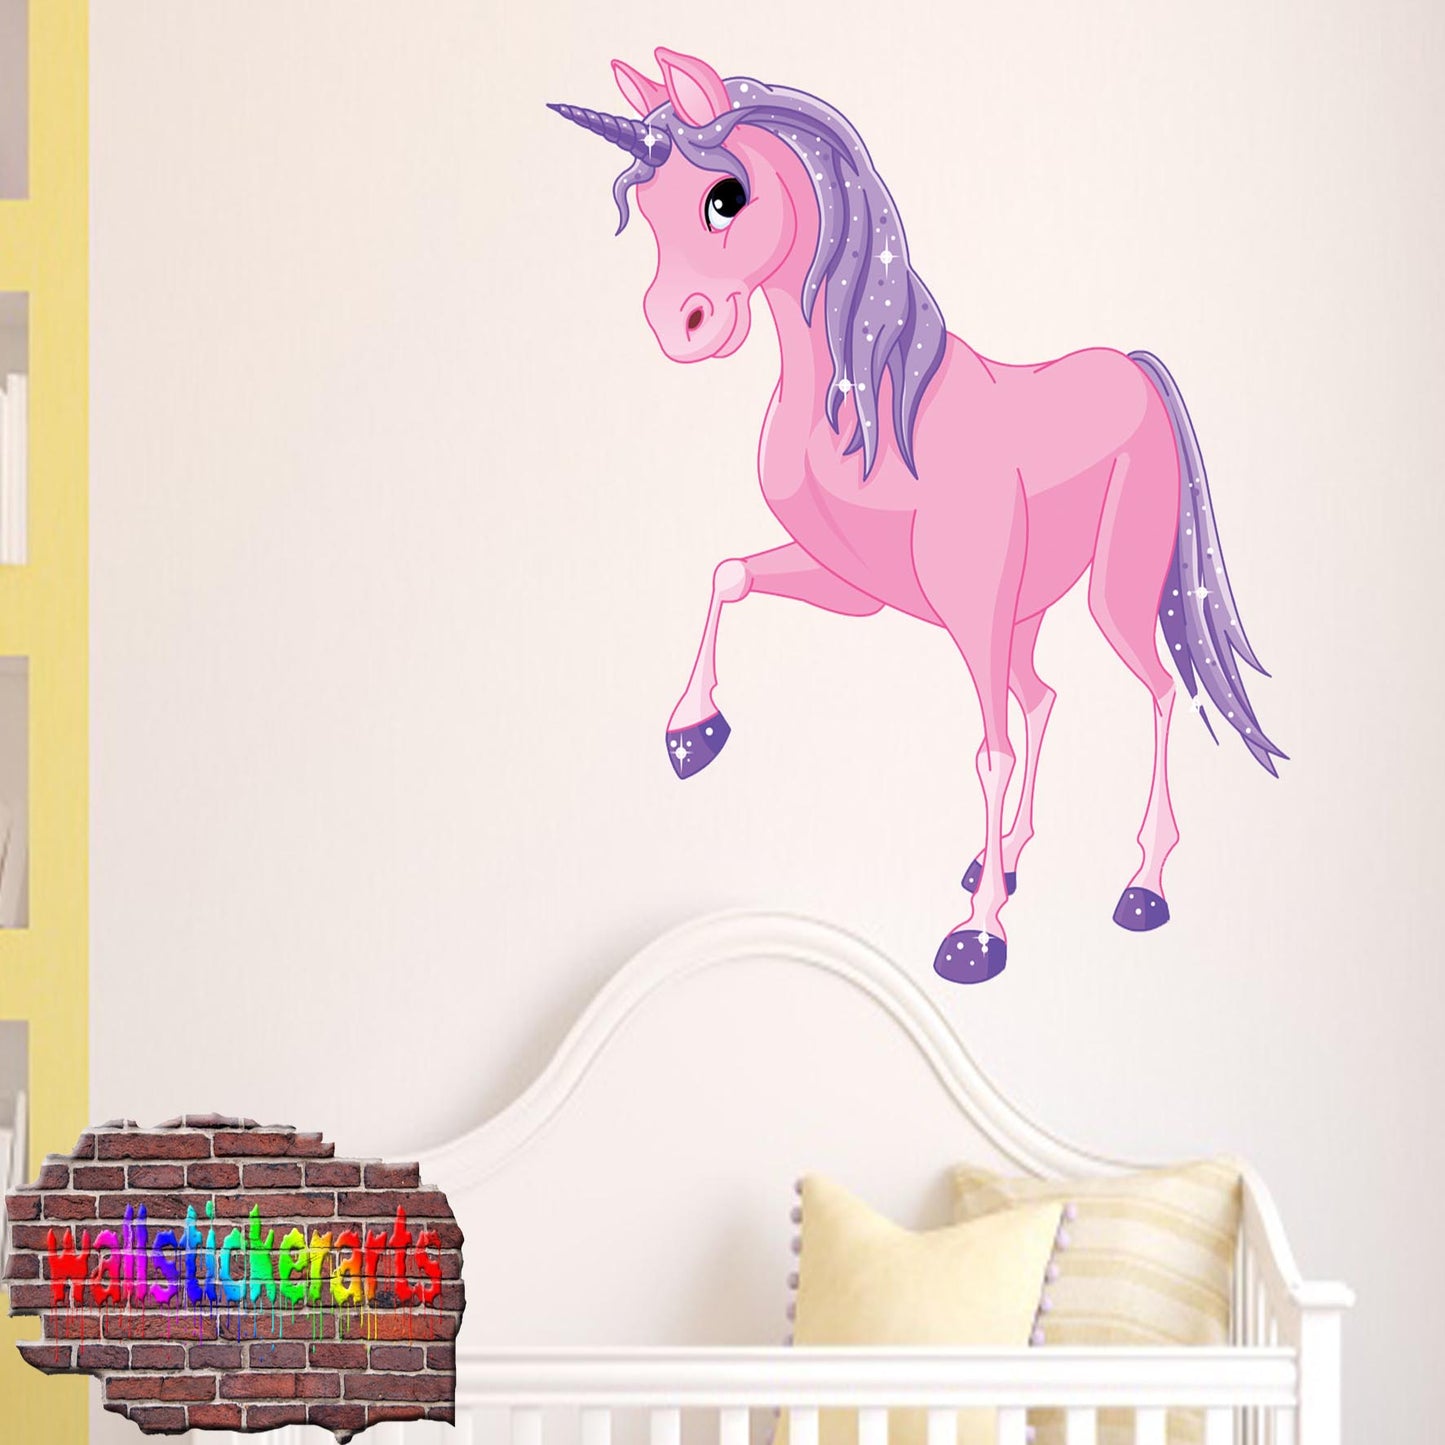 Classy Pink Unicorn 3d Smashed Wall Sticker Girls Room Decoration Decal Murals